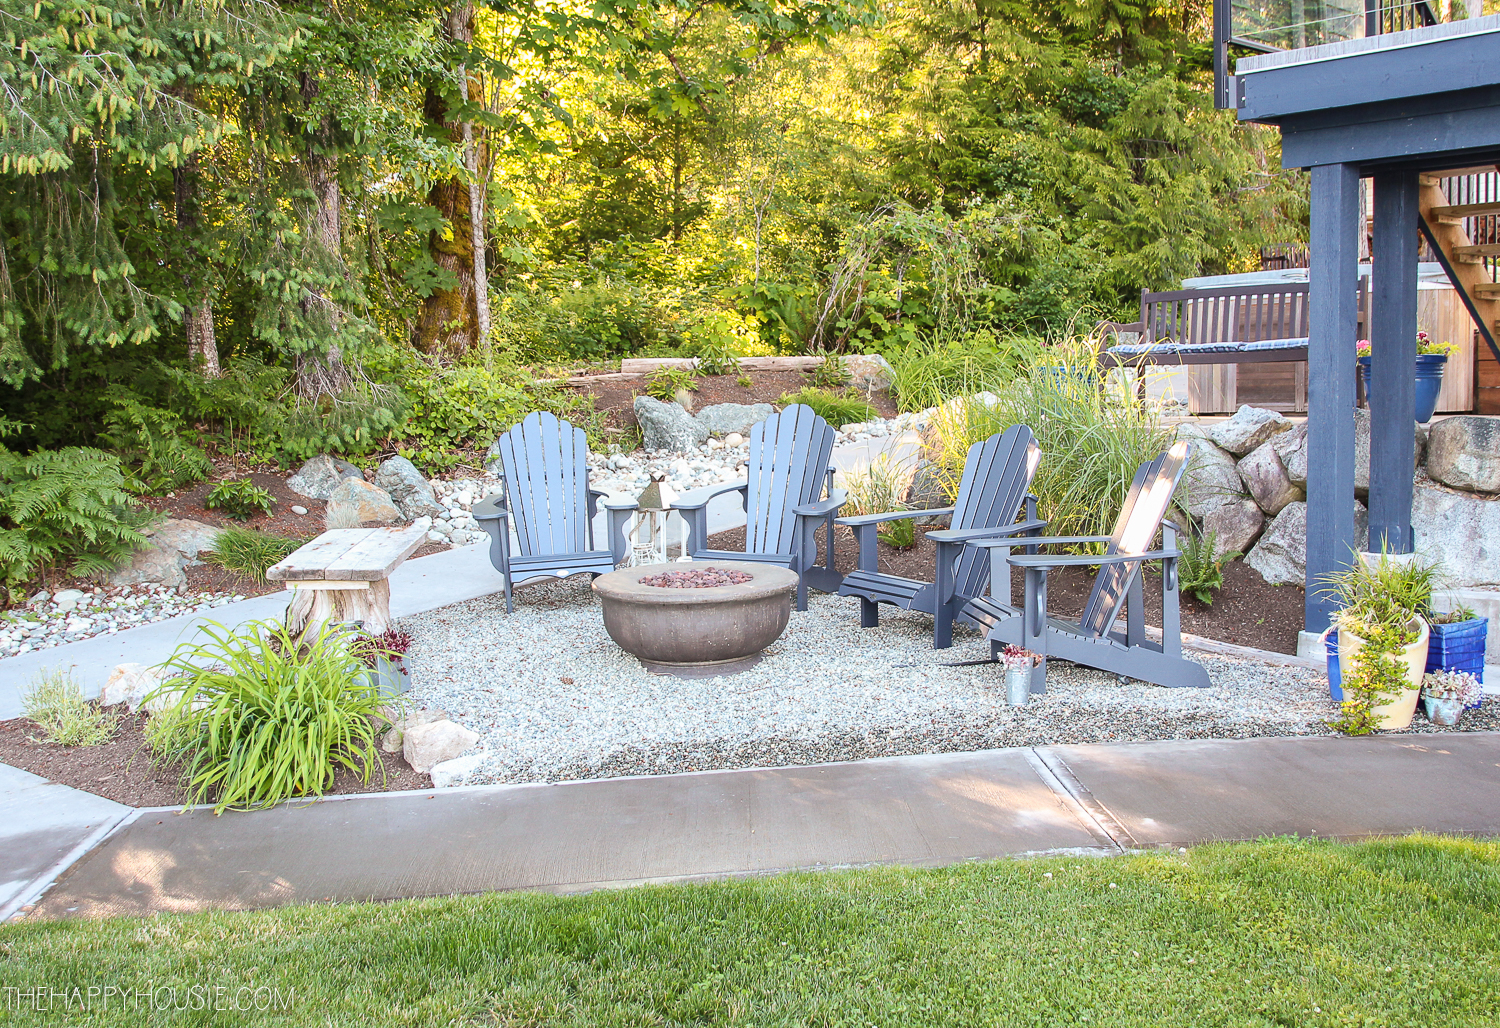 a pea gravel patio area tucked between two converging sidewalks in a yard